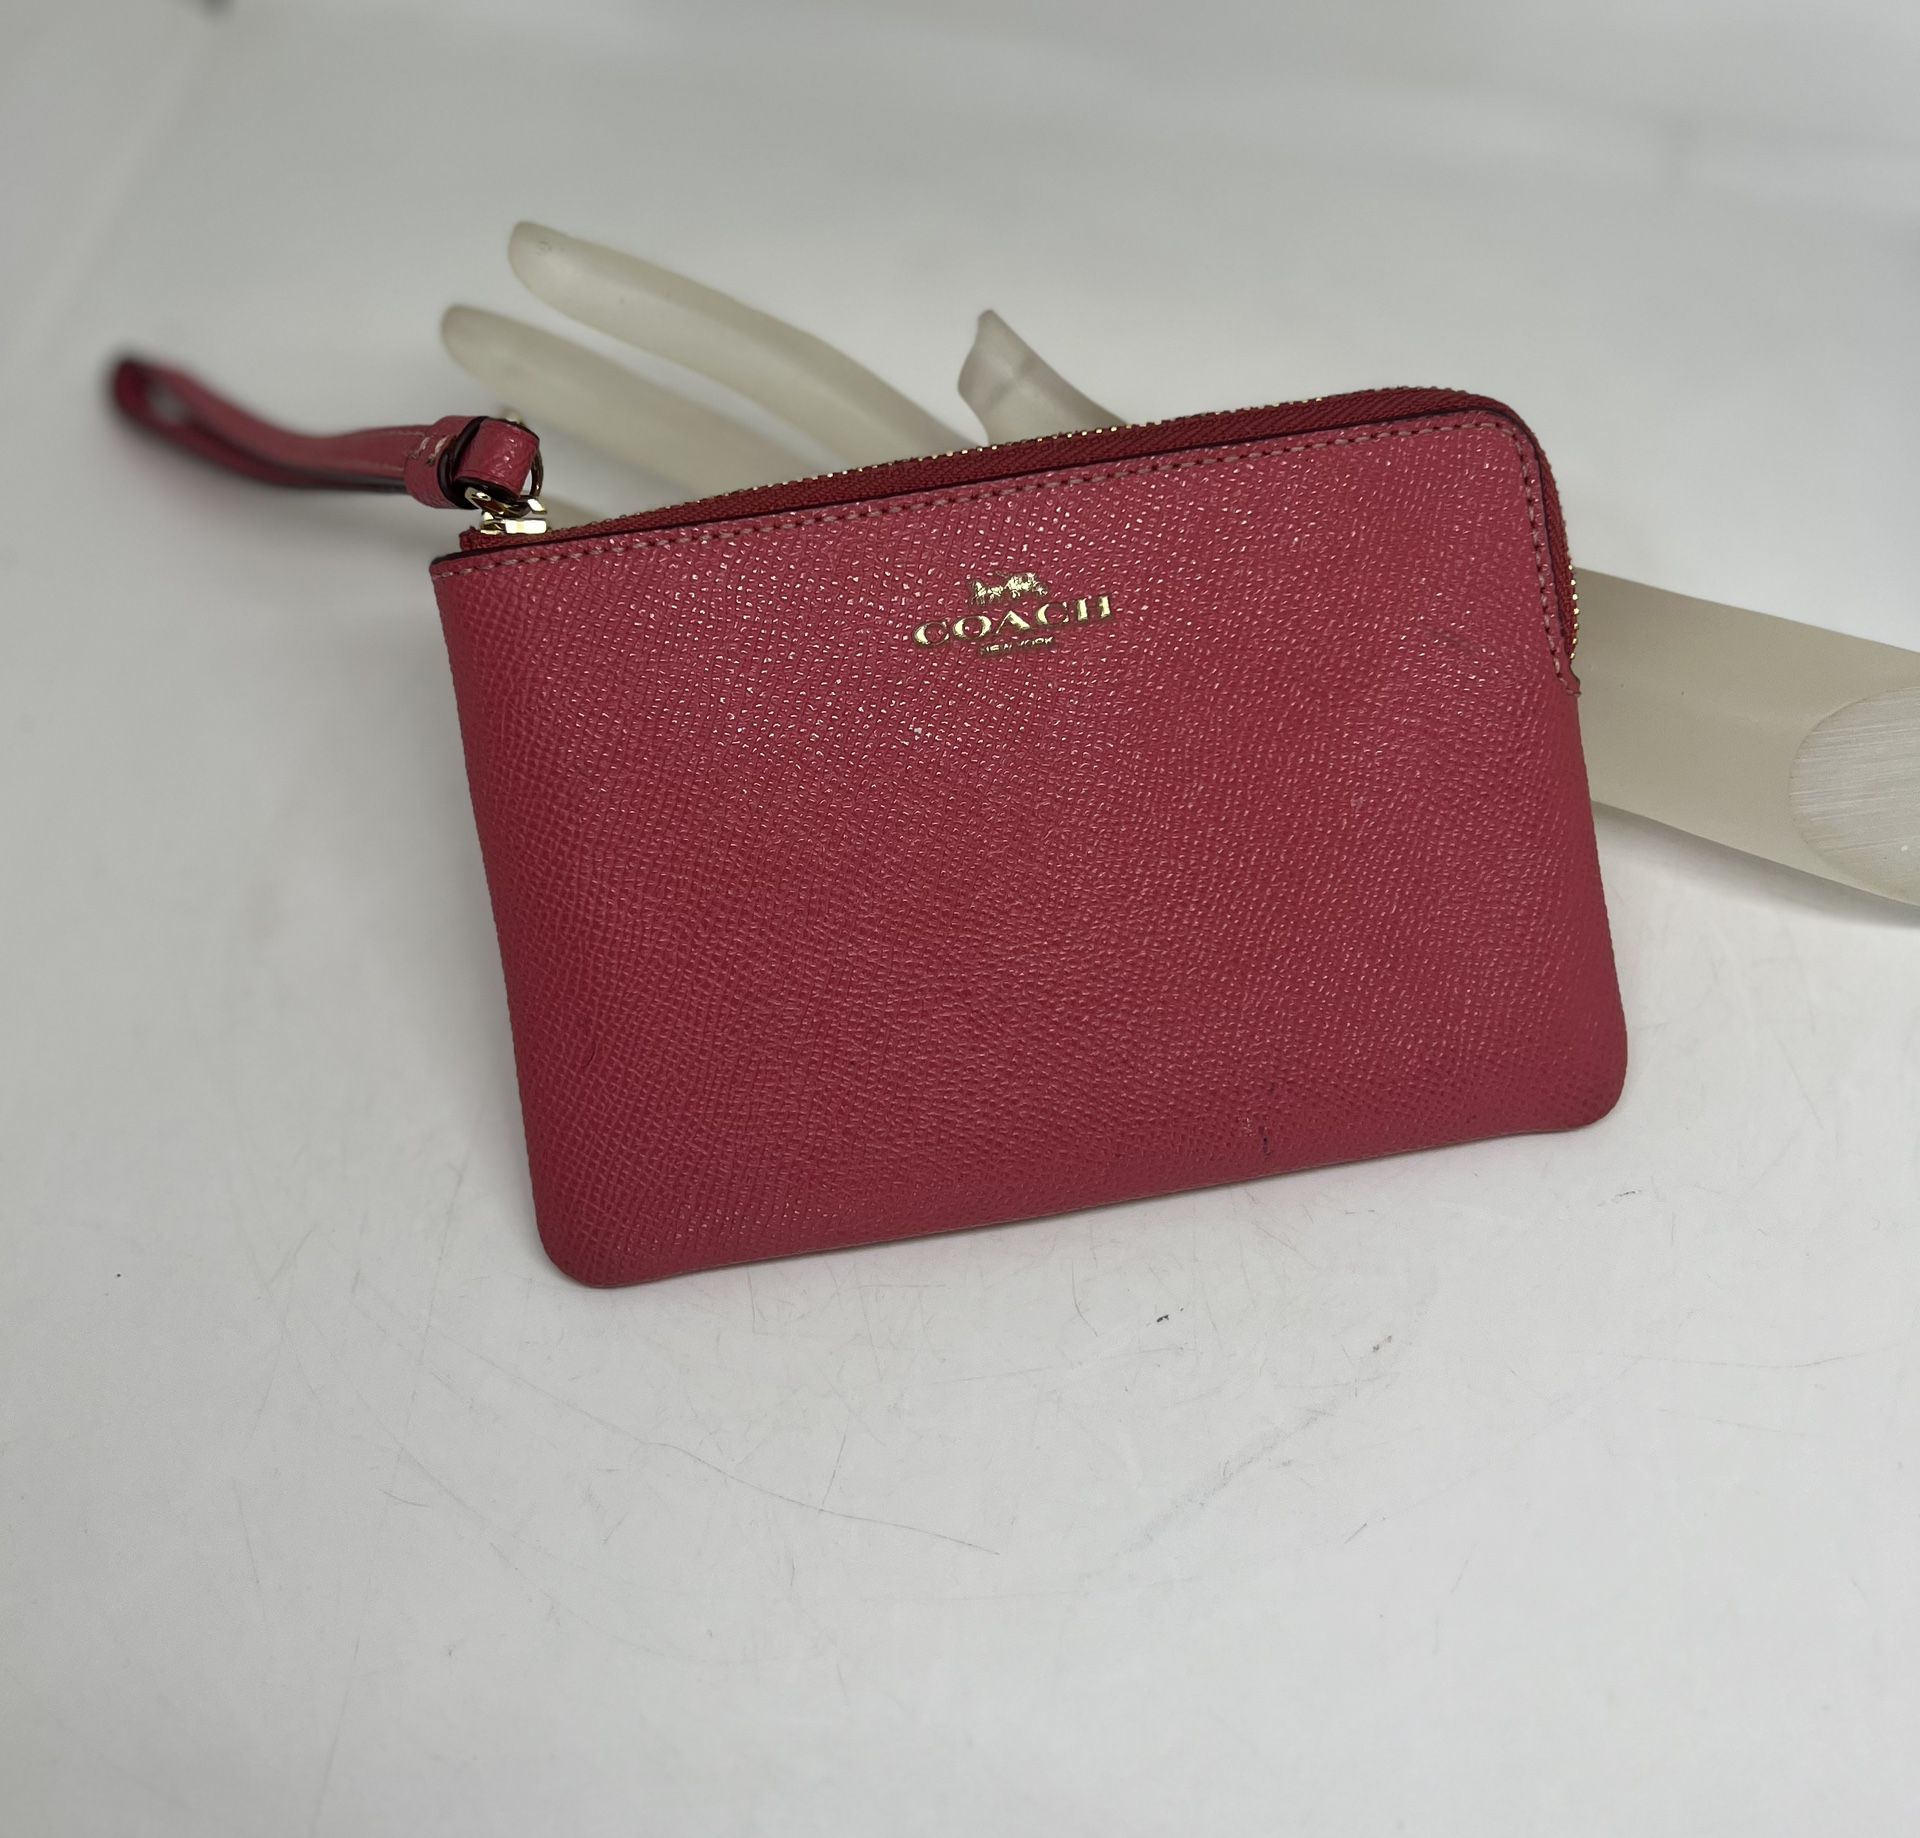 COACH Pink Leather Wristlet